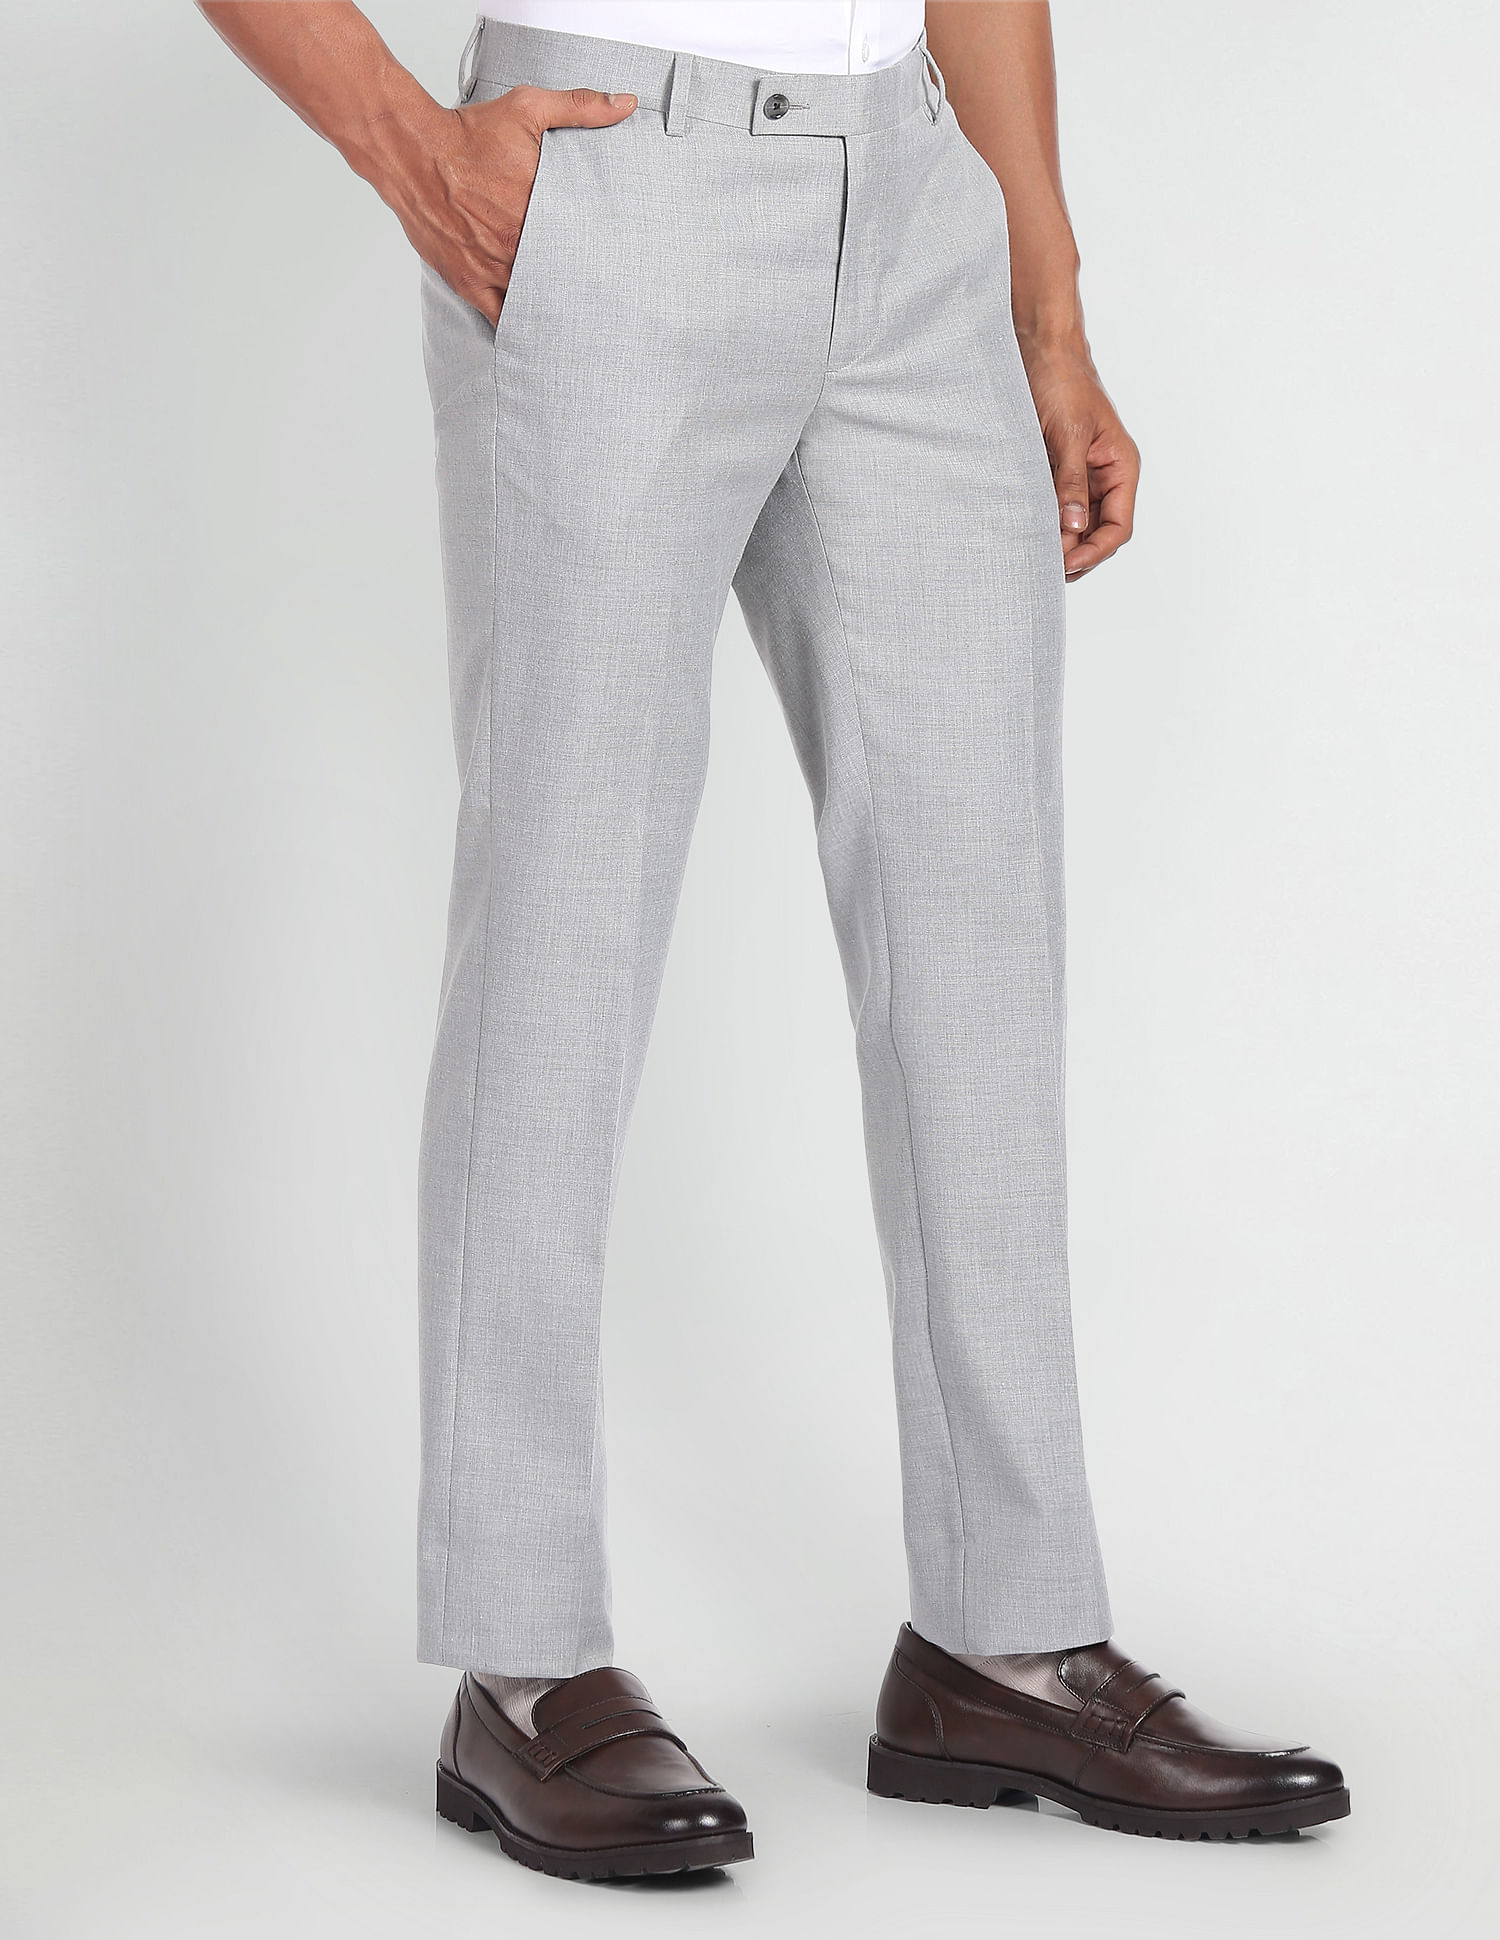 Buy Hiltl Khaki Solid Formal trousers Online - 526090 | The Collective